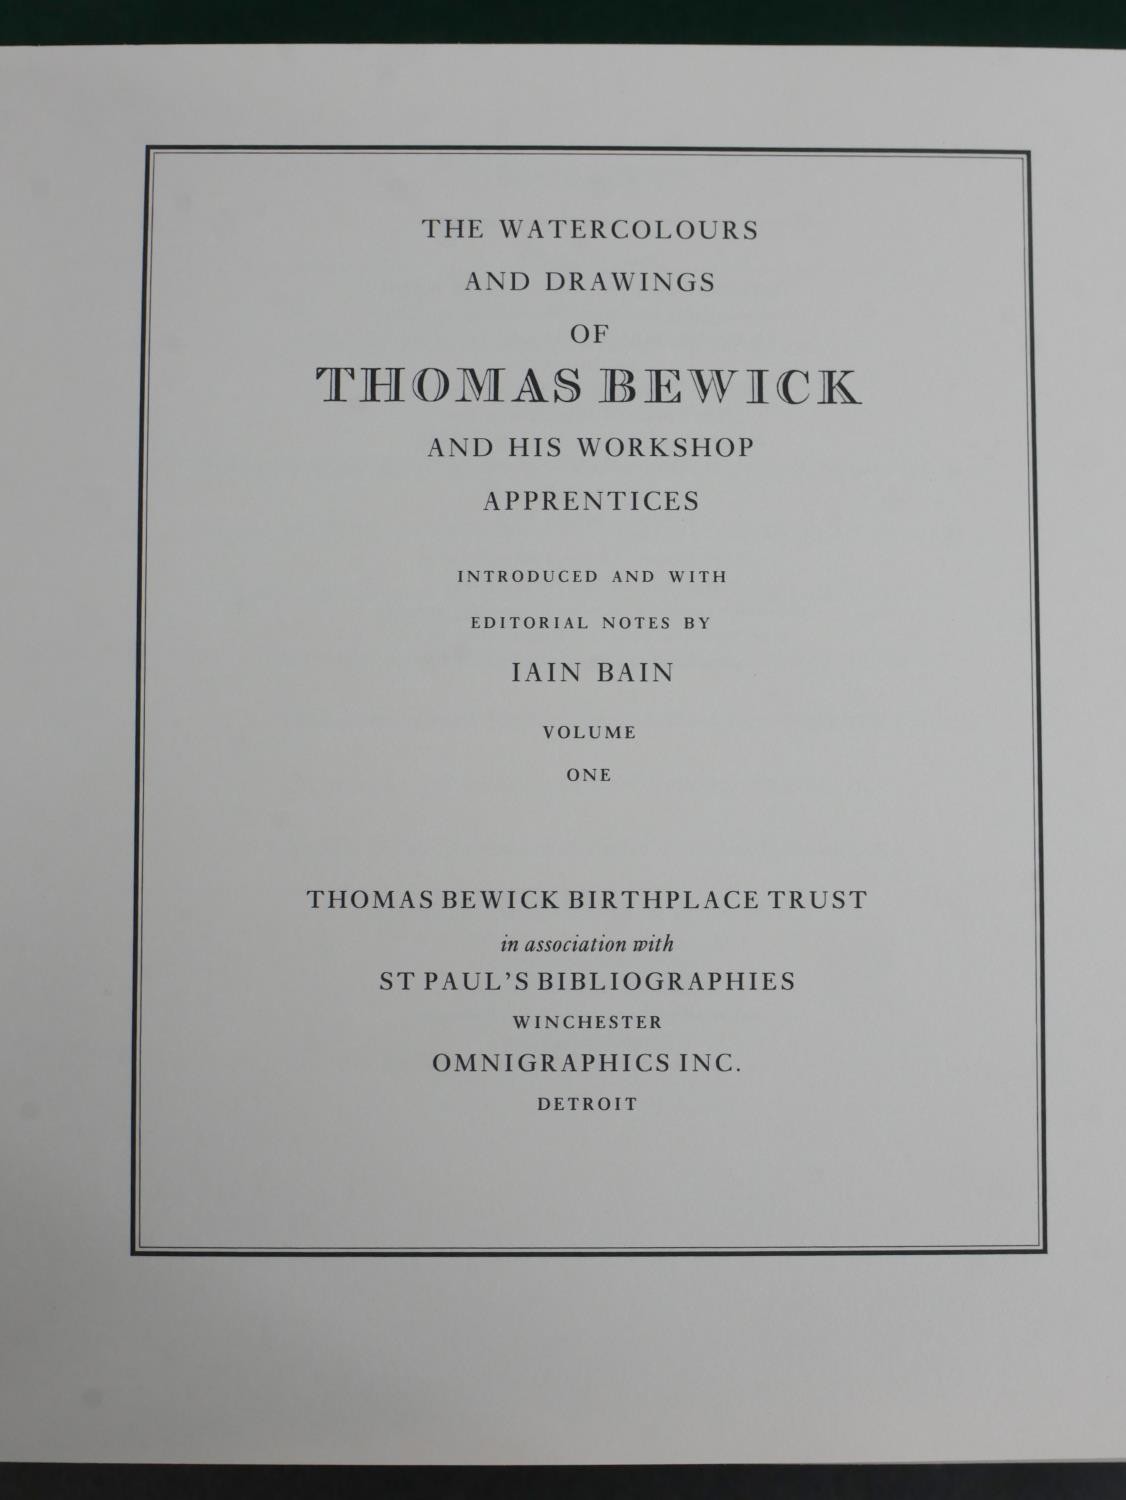 Iain Bain; The Watercolours and Drawings of Thomas Bewick And His Workshop Apprentices, volumes I - Image 8 of 9